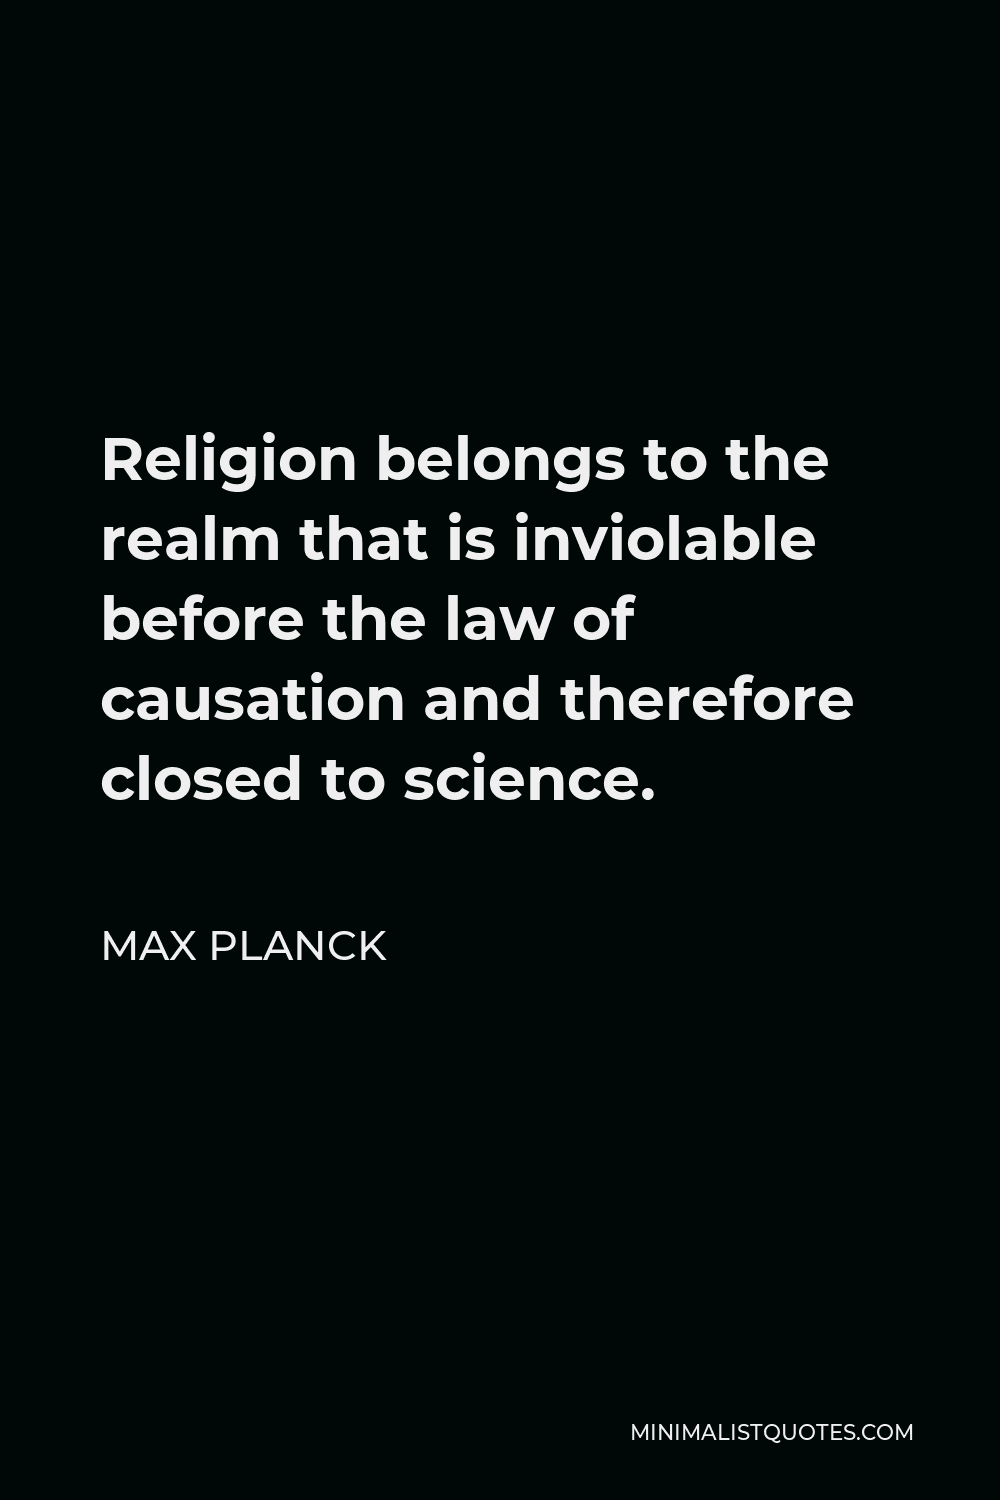 Max Planck Quote - Religion belongs to the realm that is inviolable before the law of causation and therefore closed to science.